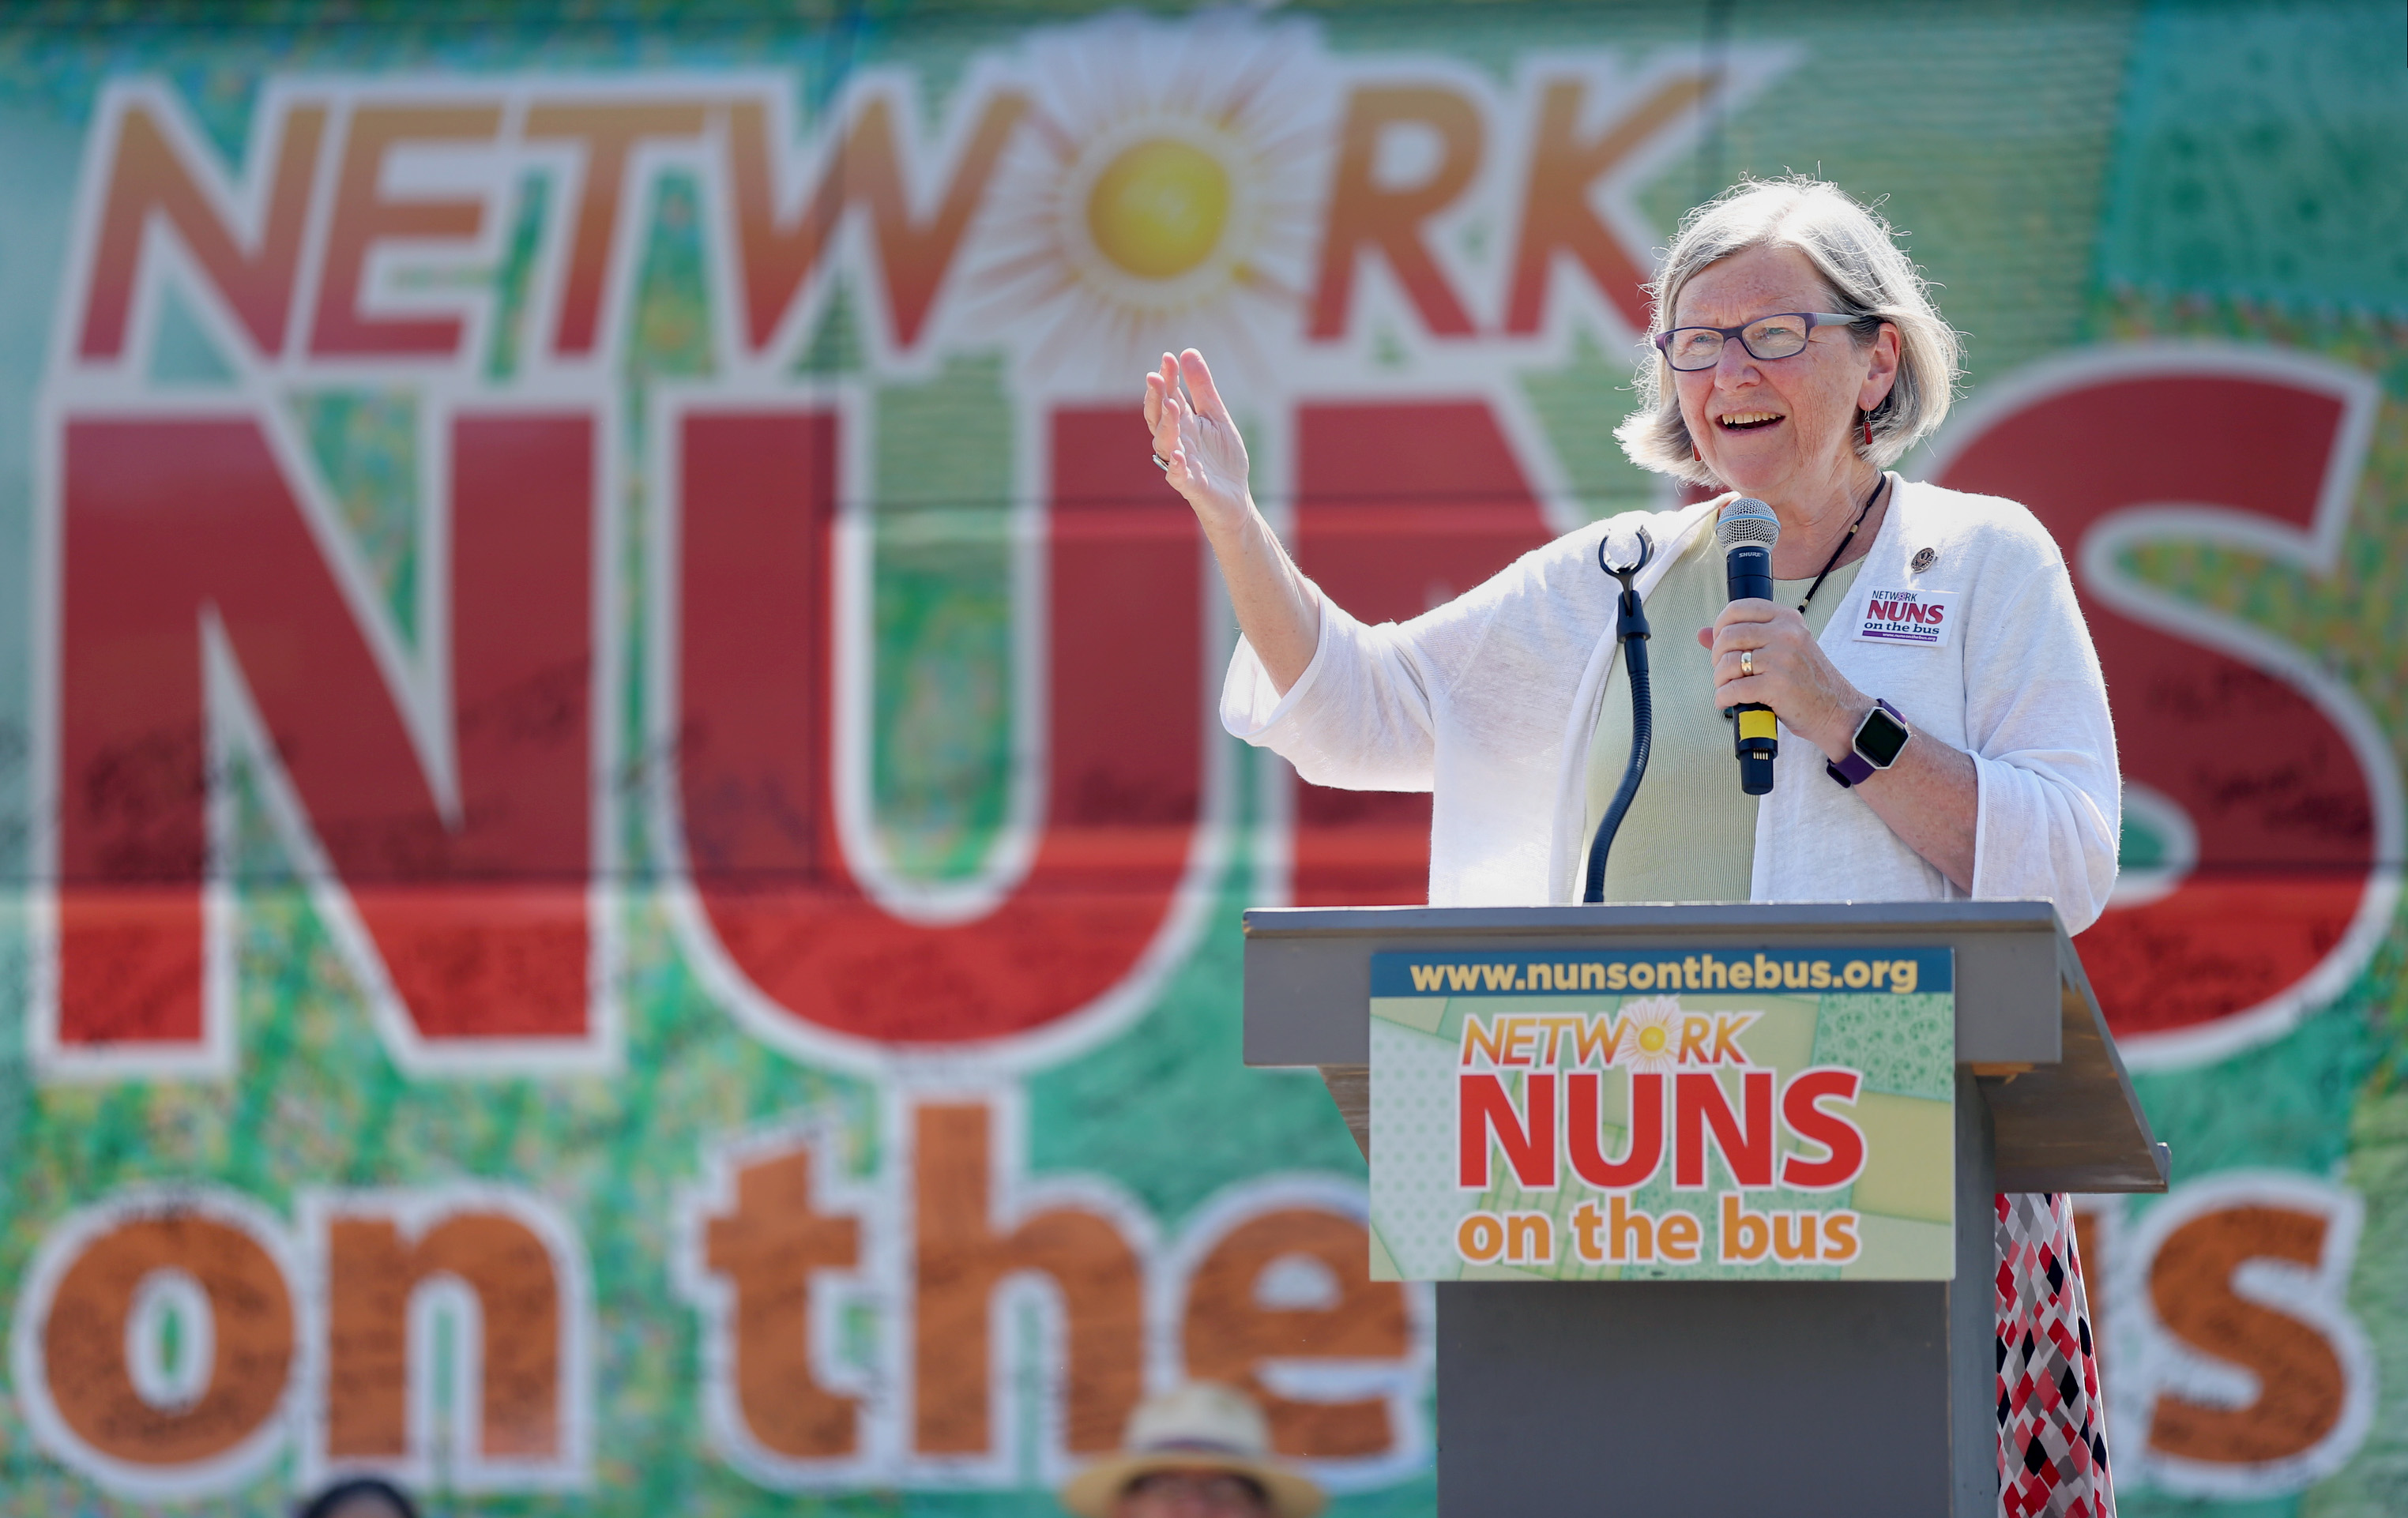 Sister Simone Campbell, leader of the Nuns on the Bus, speaks during a stop at Boston College High School, July 23, 2016.